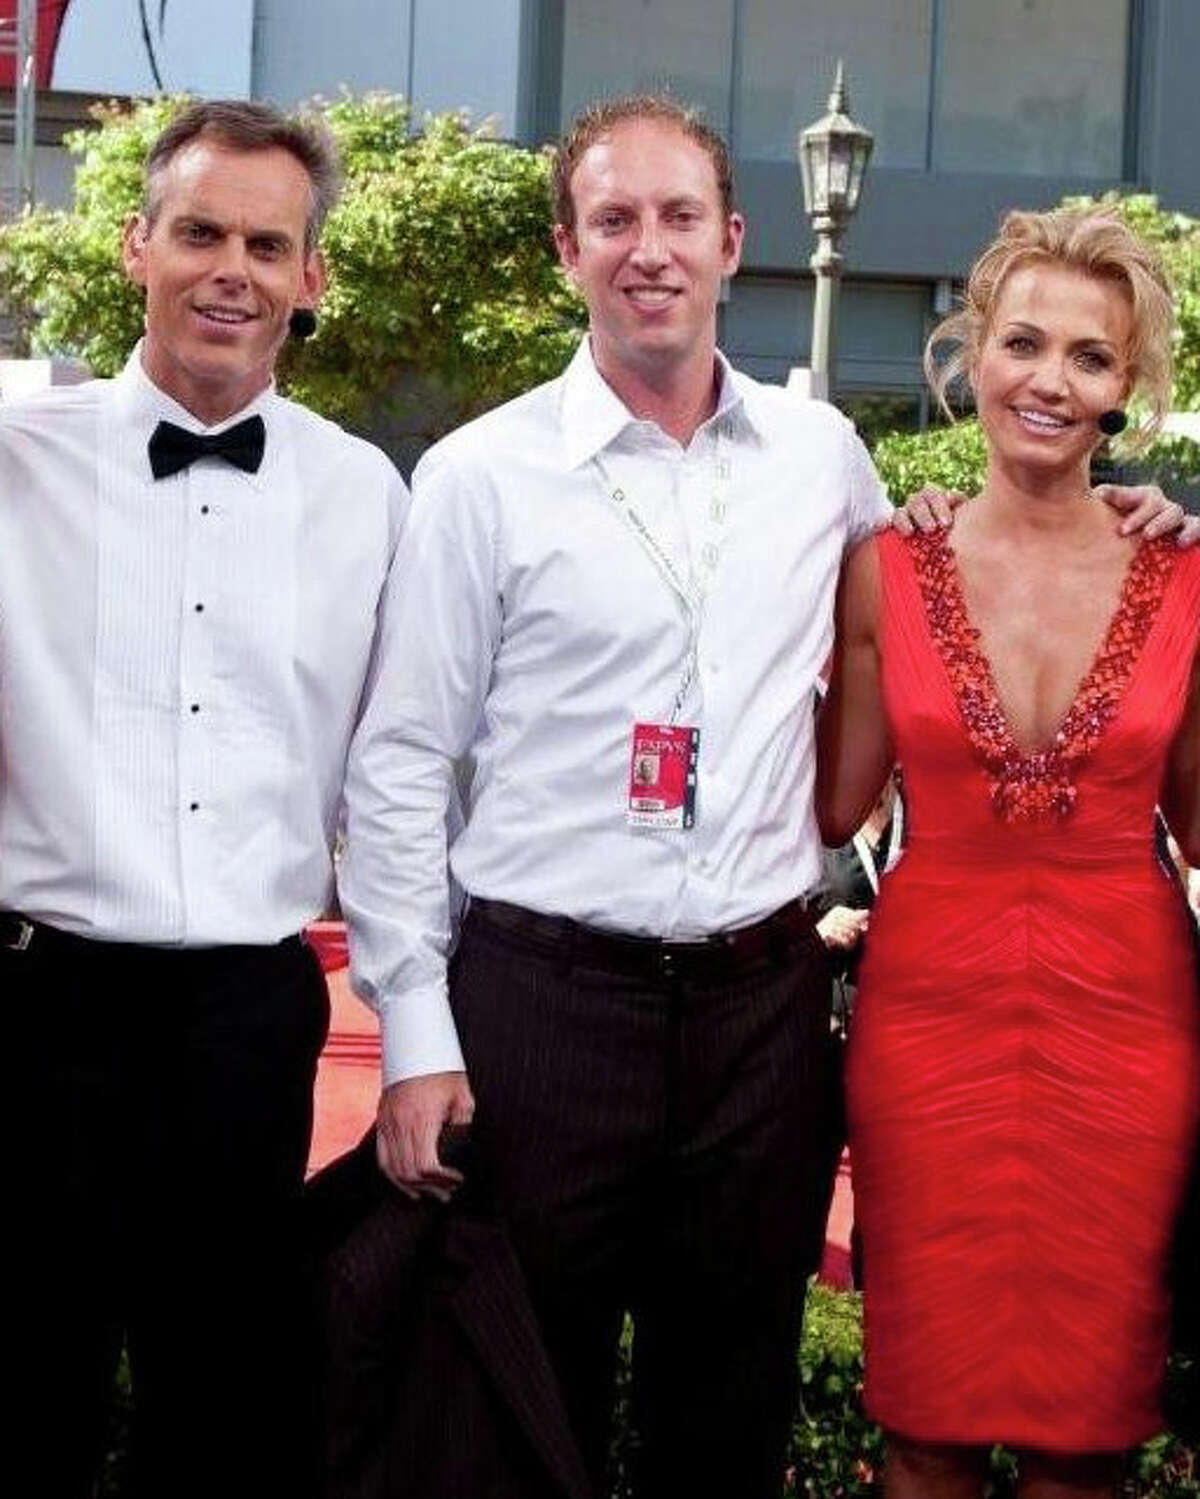 SportsNation hosts Colin Cowherd and Michelle Beadle sandwich the show's co-creator Jamie Horowitz during the 2010 ESPY Awards in Los Angeles.